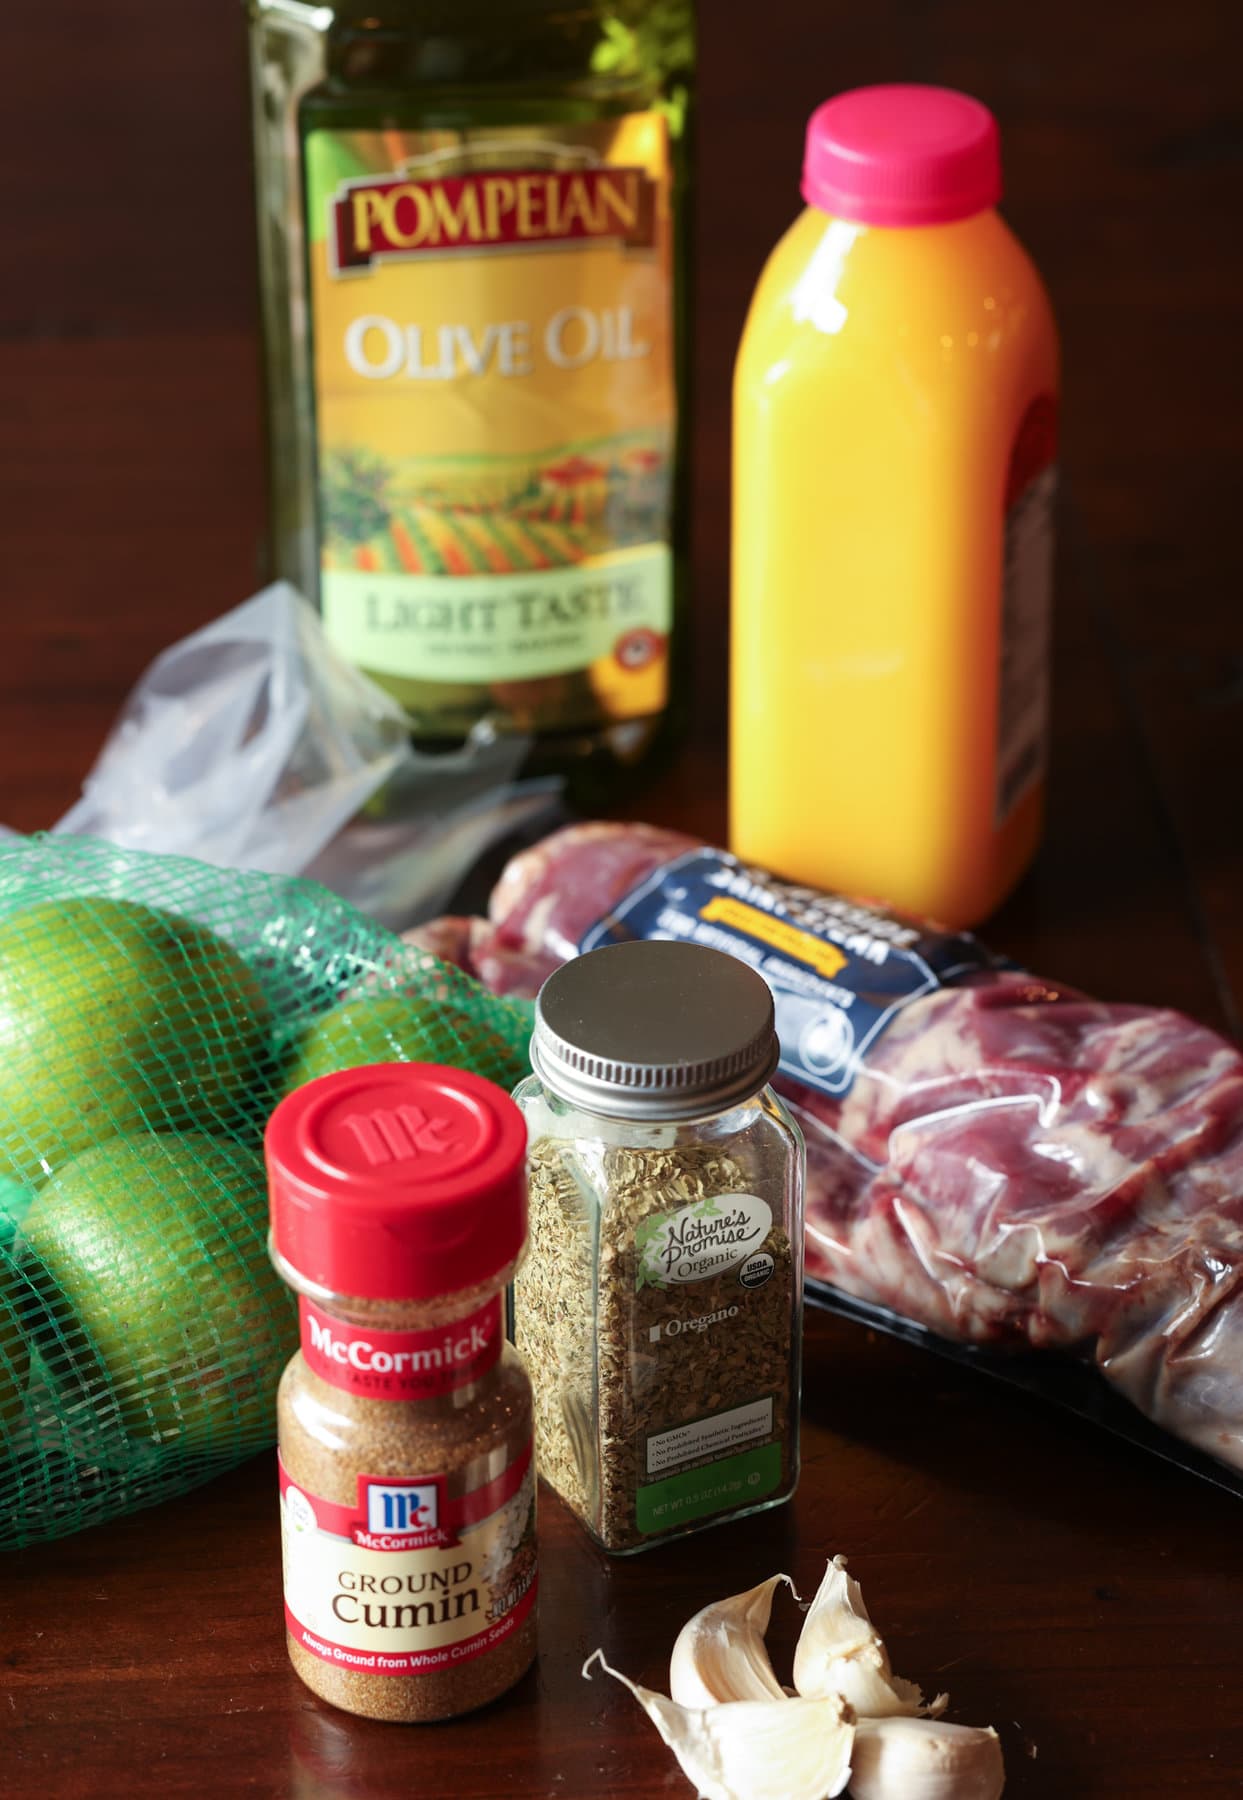 Ingredients for Crane Asada marinade: olive oil, orange juice, limes, and spices